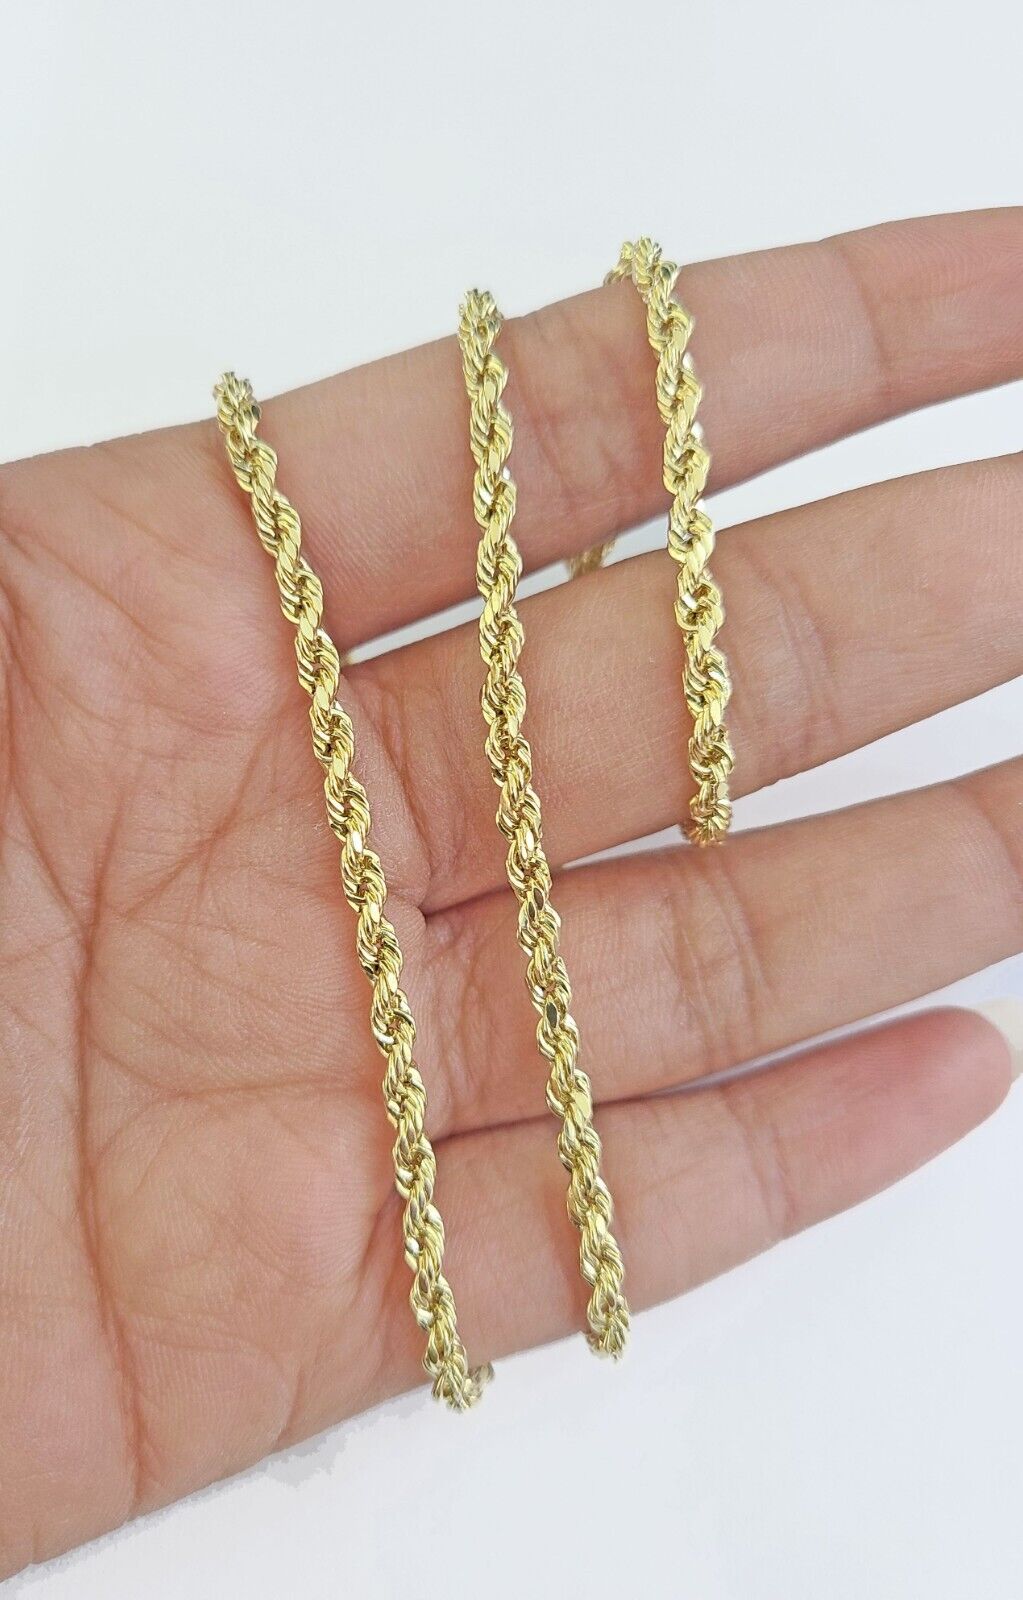 Real  14k Yellow Gold Rope Chain 3mm 22 Inches Ladies Necklace